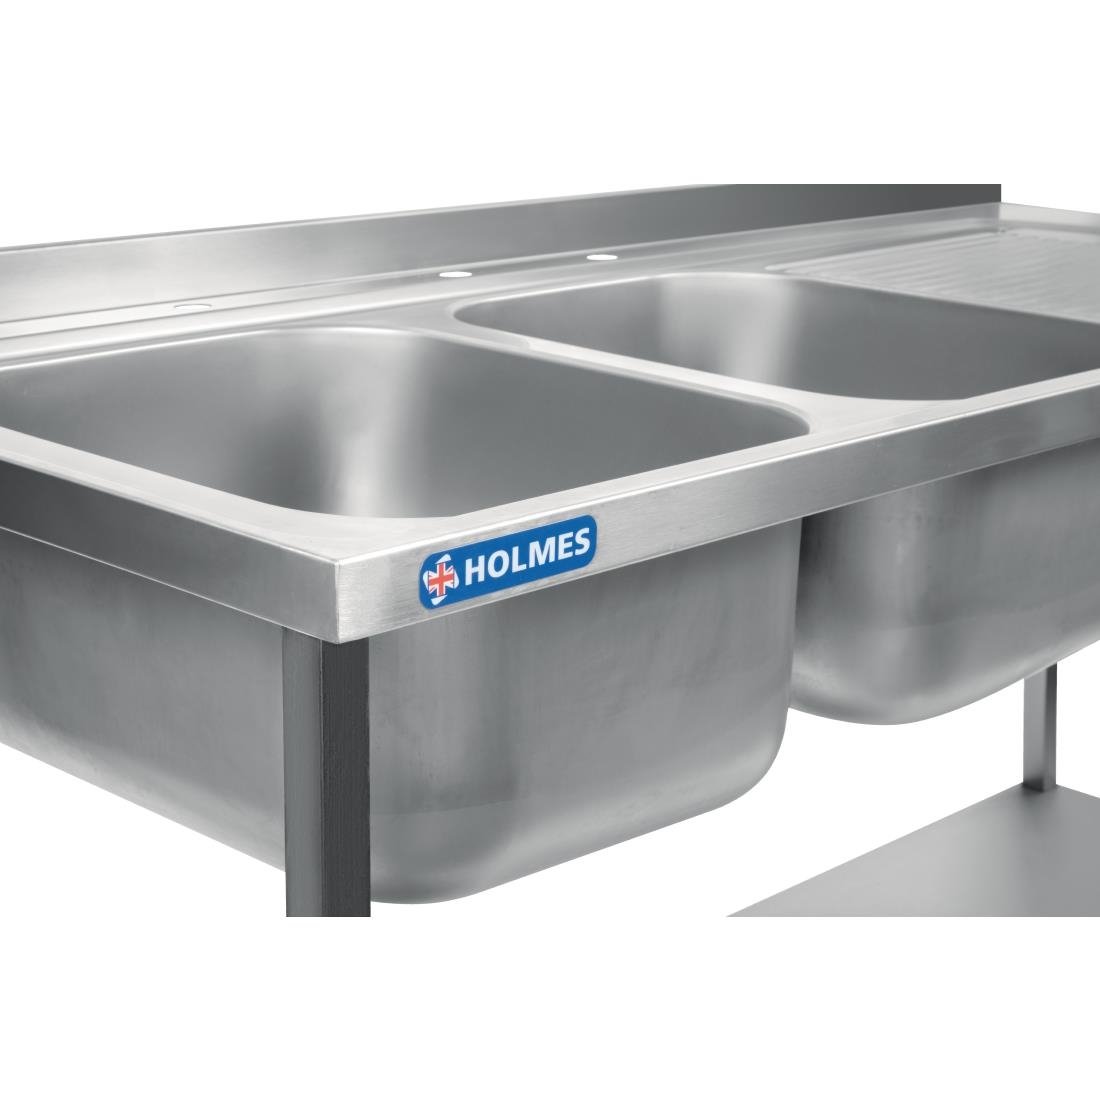 DR394 Holmes Fully Assembled Stainless Steel Sink Right Hand Drainer 1800mm JD Catering Equipment Solutions Ltd